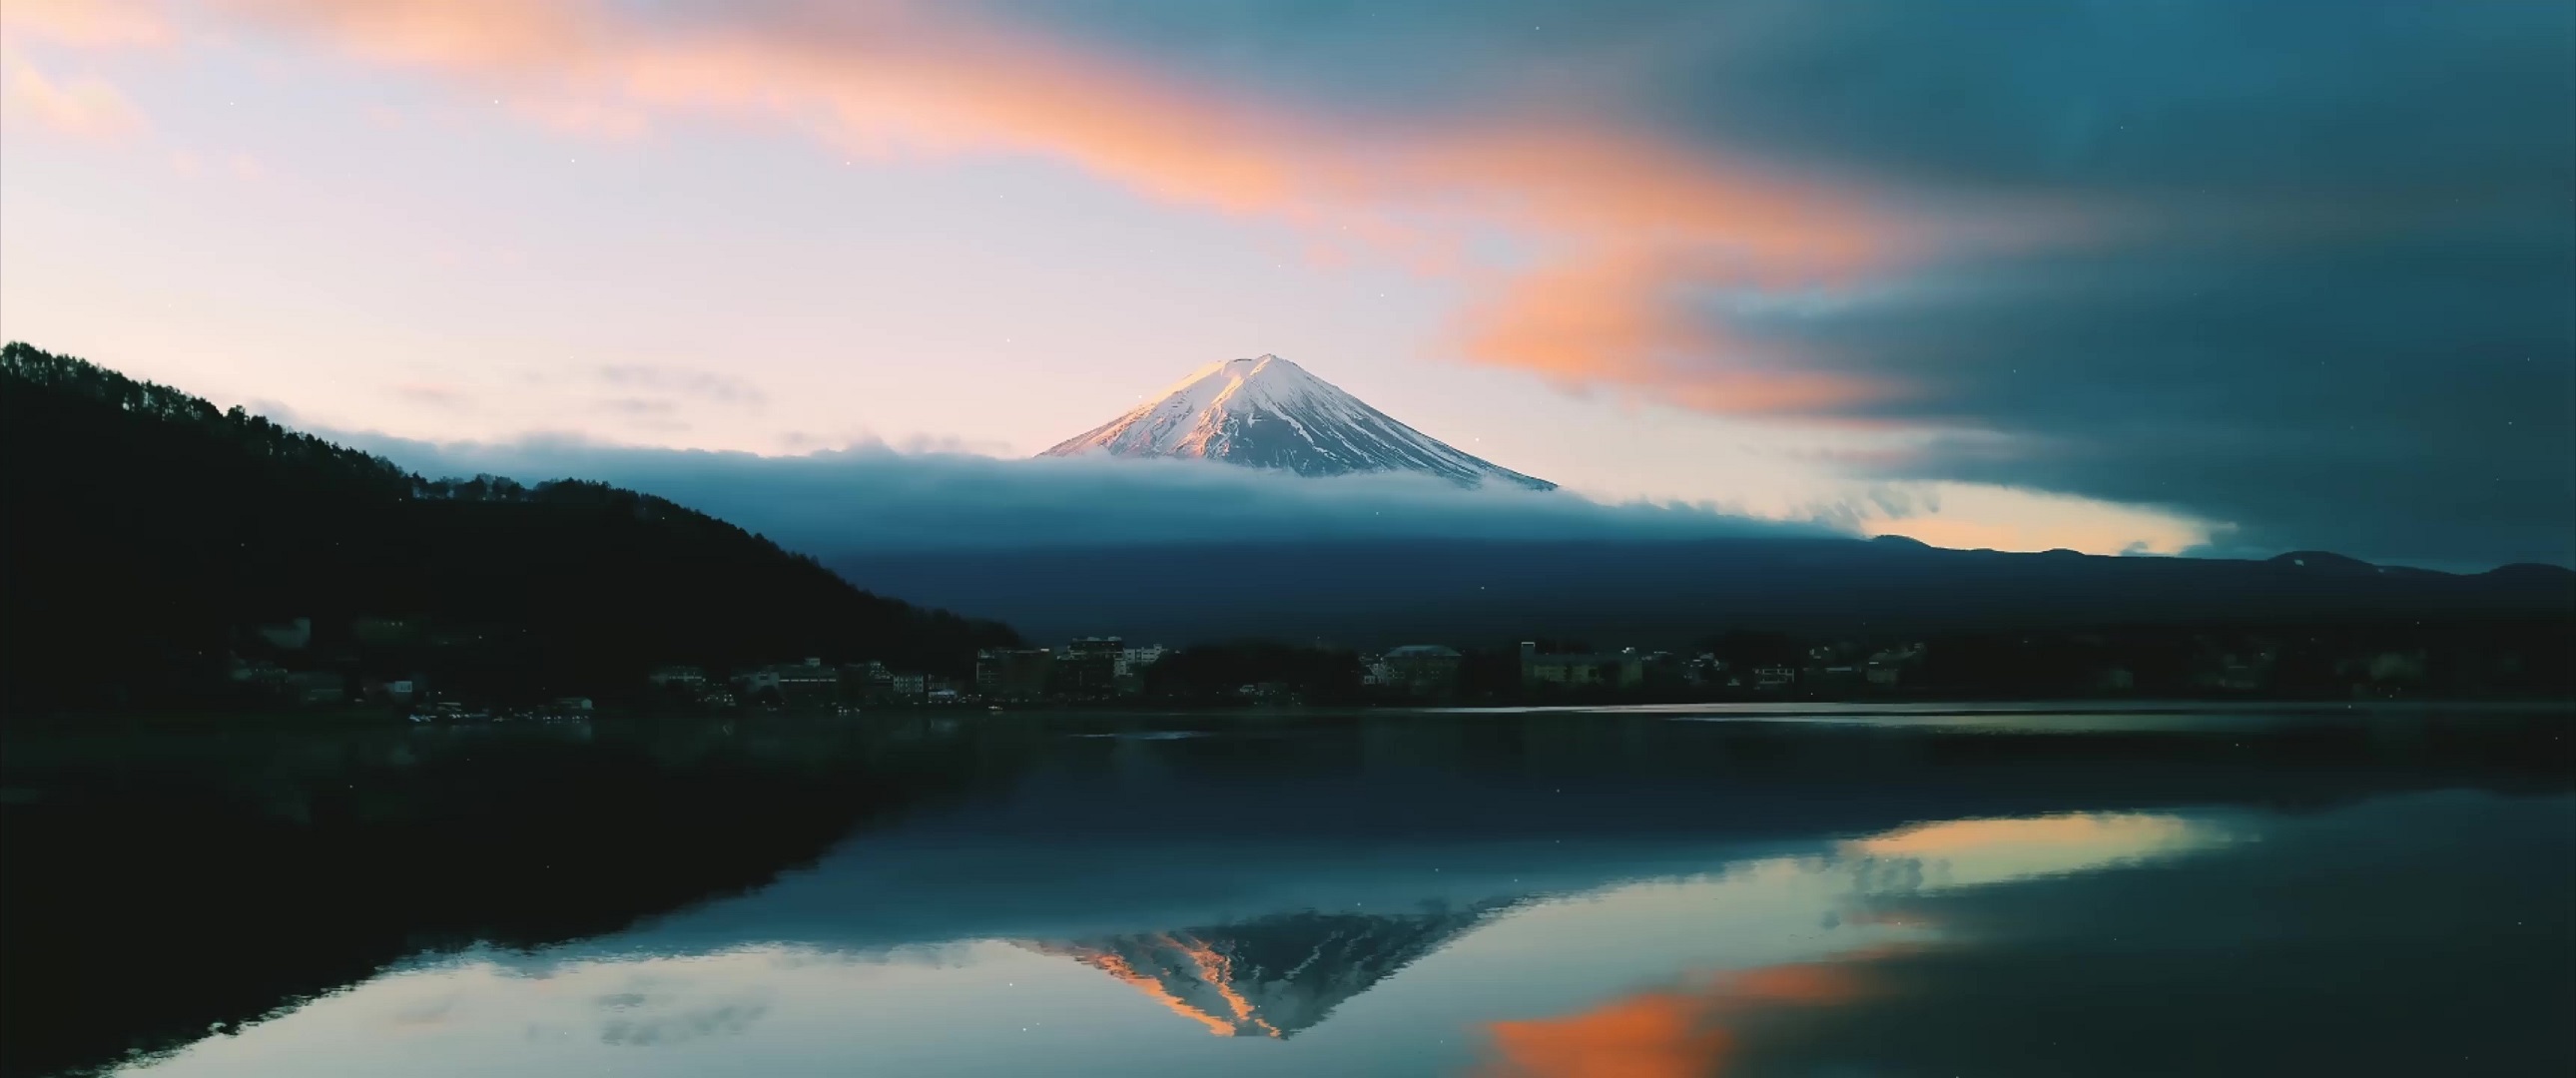 Mt Fuji Scenery Art 4k HD Artist 4k Wallpapers Images Backgrounds  Photos and Pictures